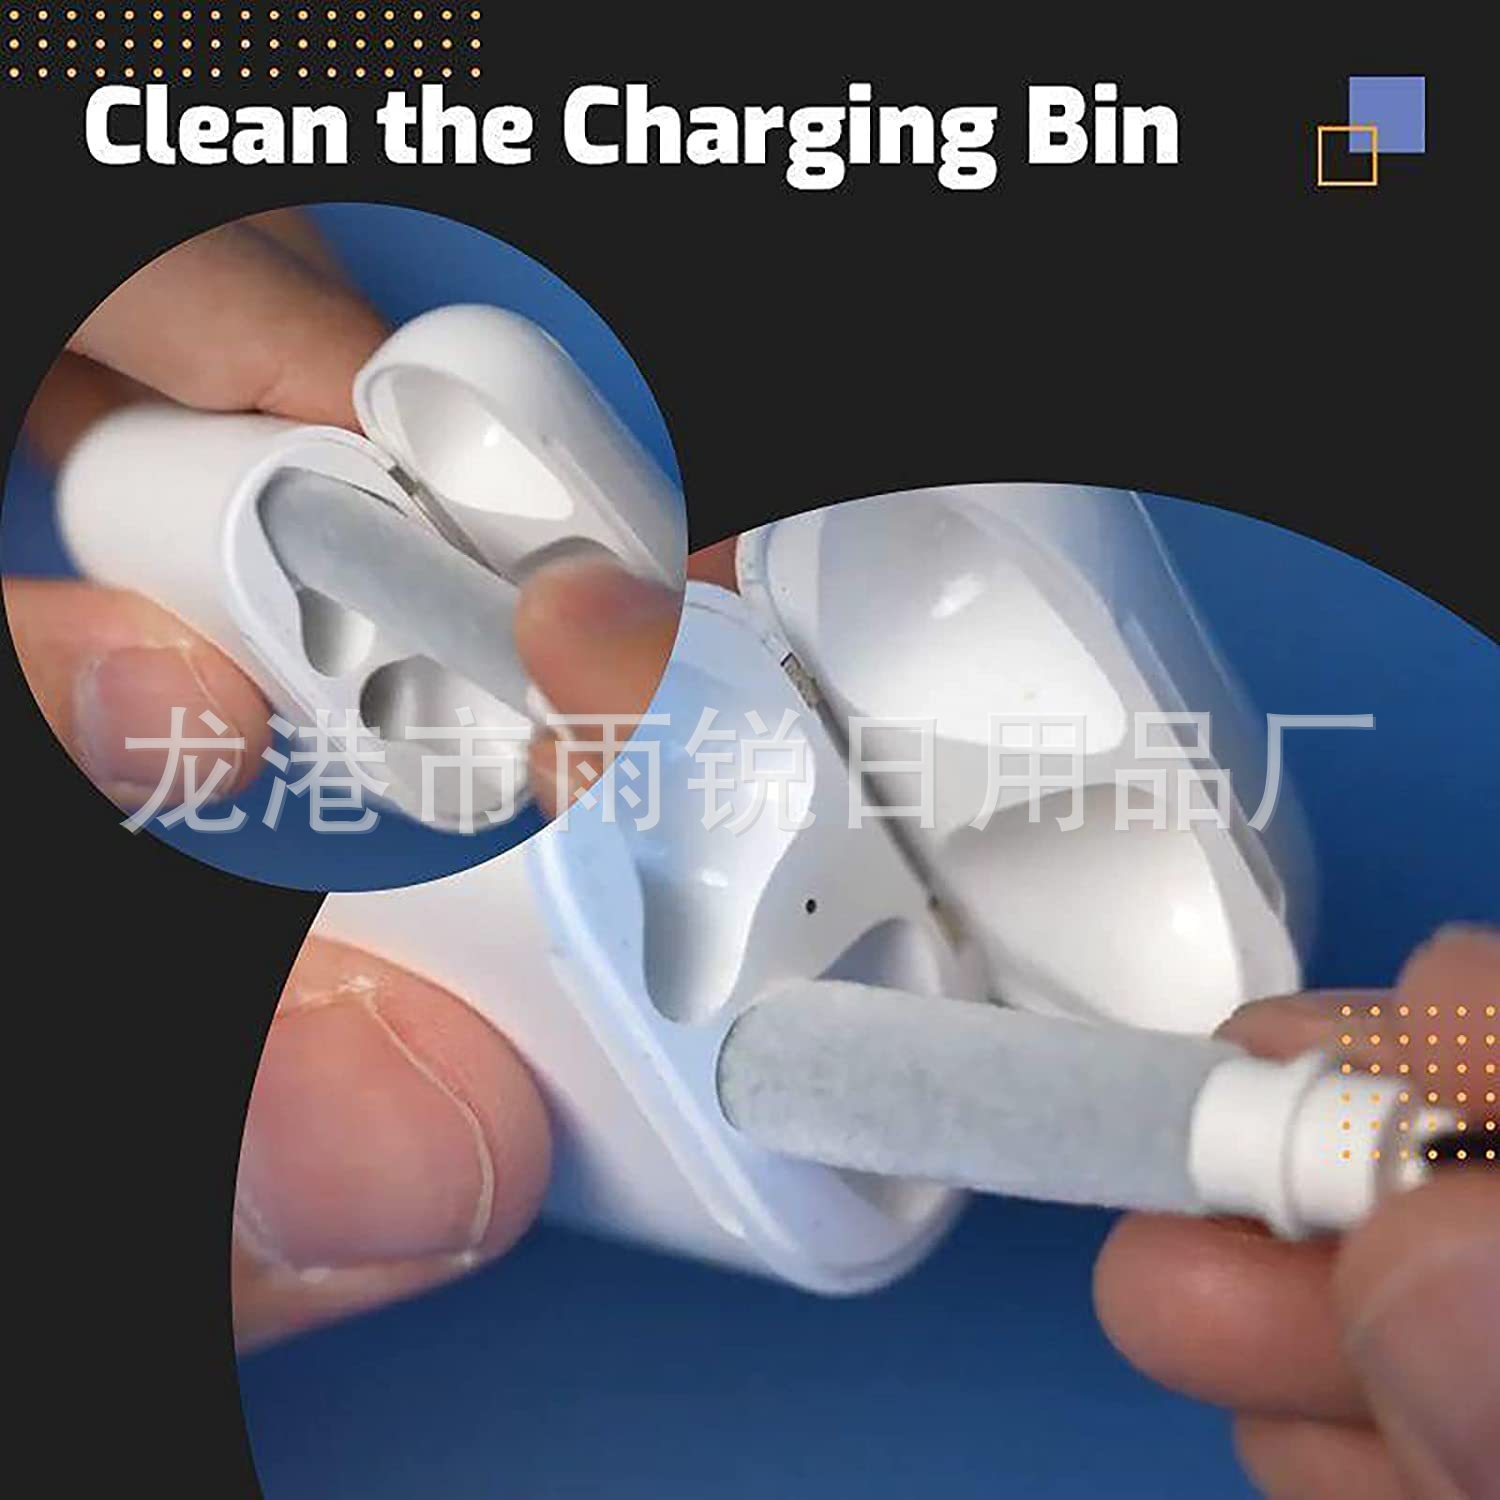 New Bluetooth Earphone Cleaning Pen Portable Earplug Cleaning Brush Digital Three-in-one Crevice Cleaning Tool